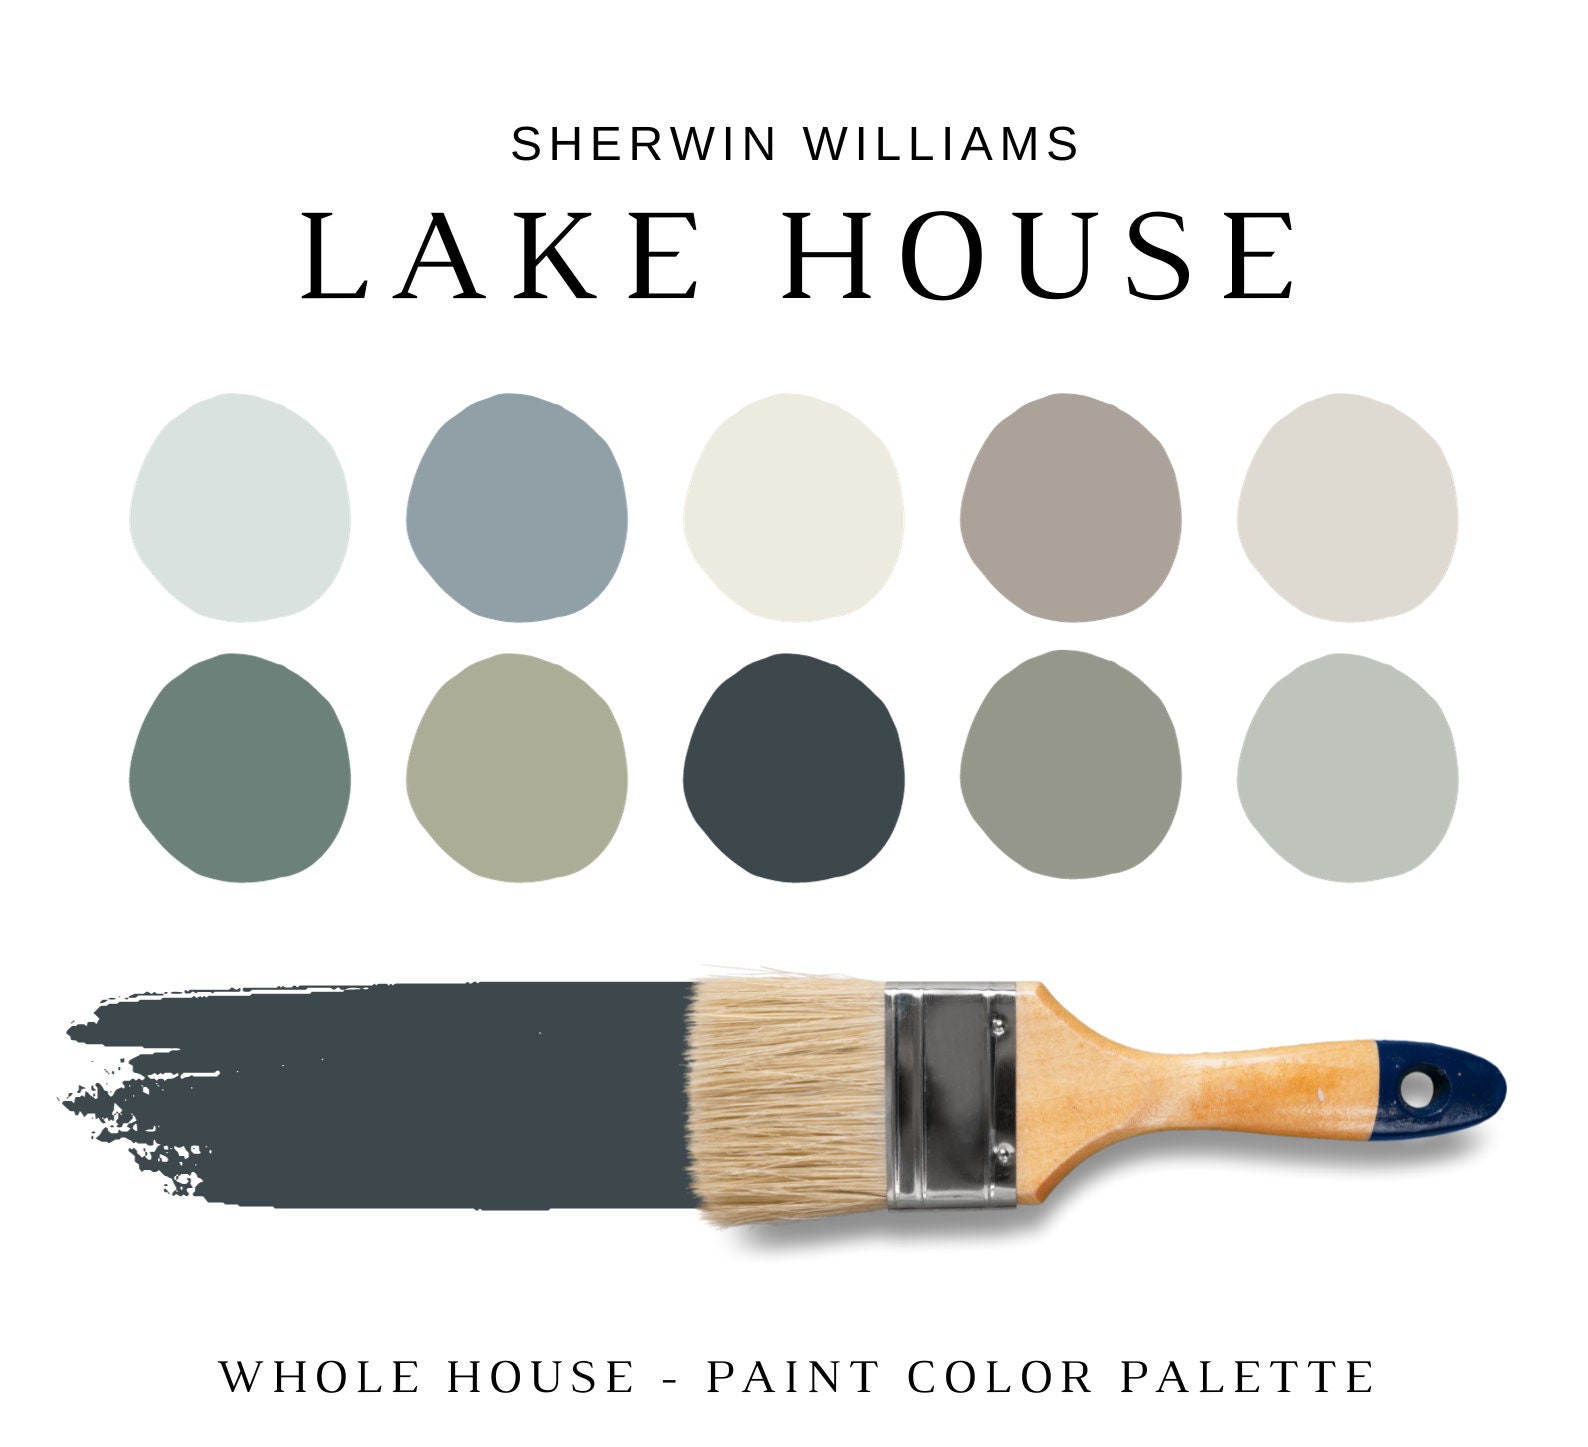 Sherwin Williams Clary Sage Palette, Sage Green Color Palette, Bestselling  Green Paint Colors, Complementary Whole House Paint Colors 